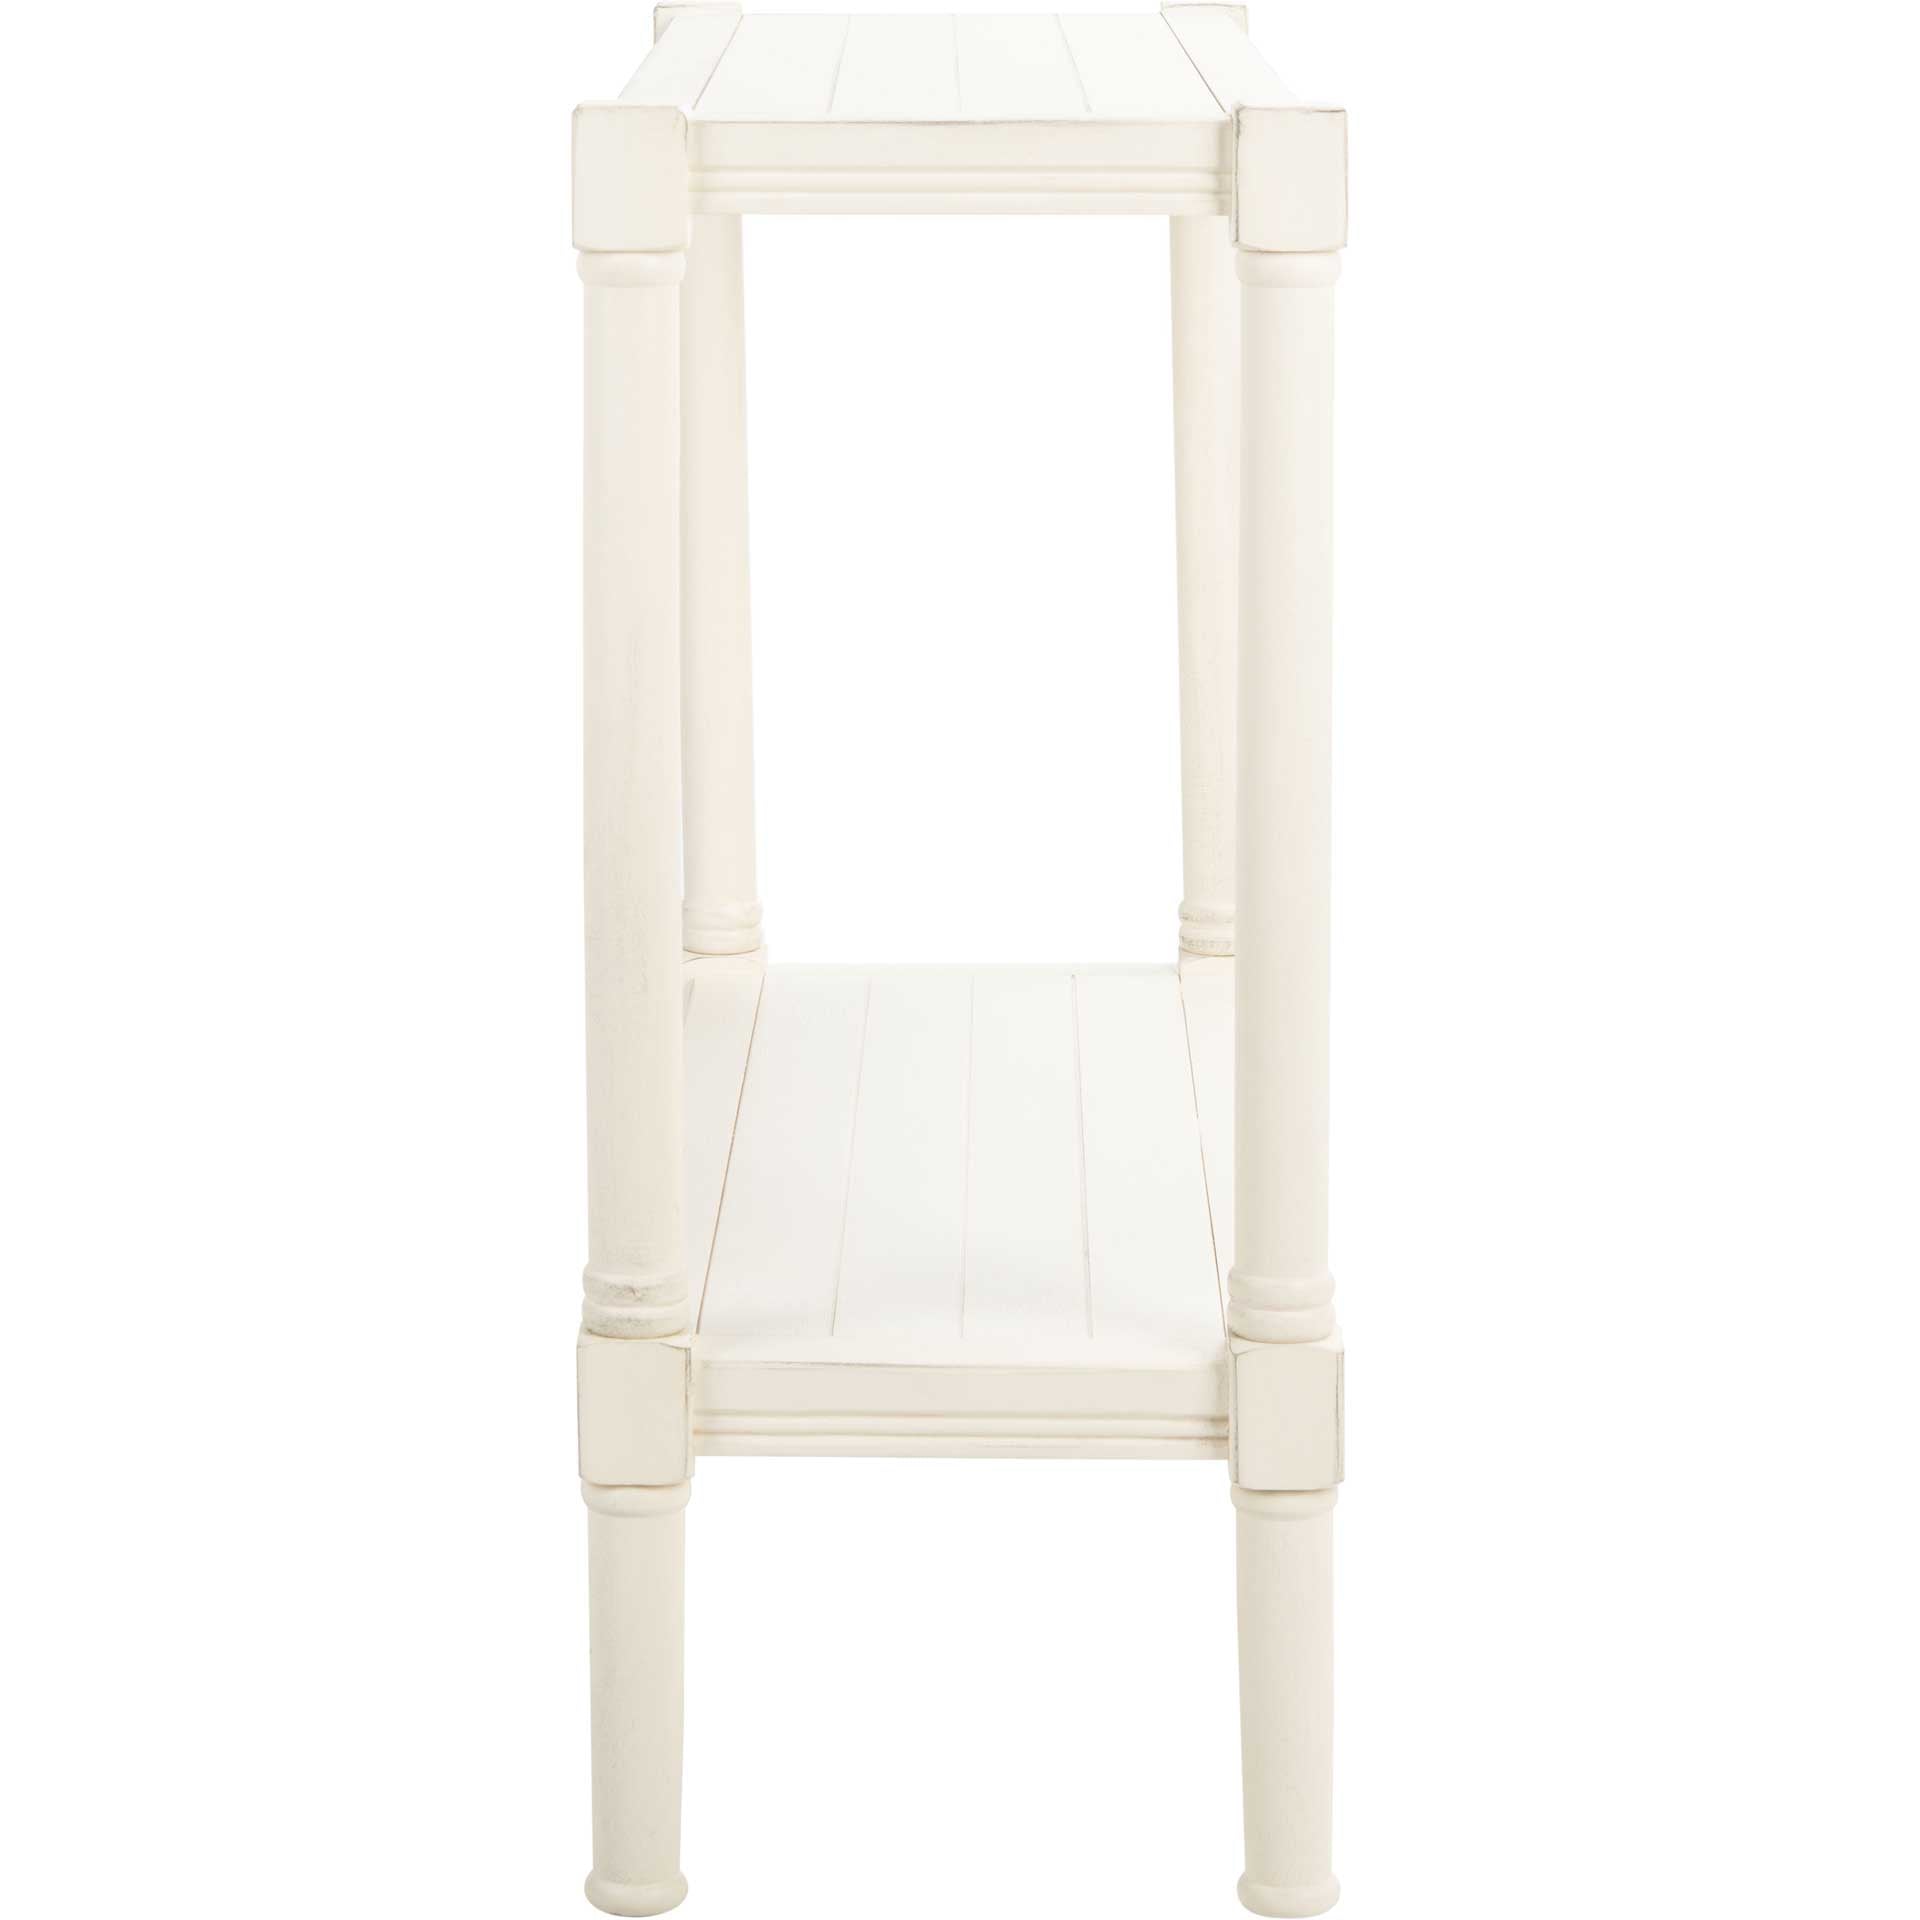 Radlin Console Table Distressed White